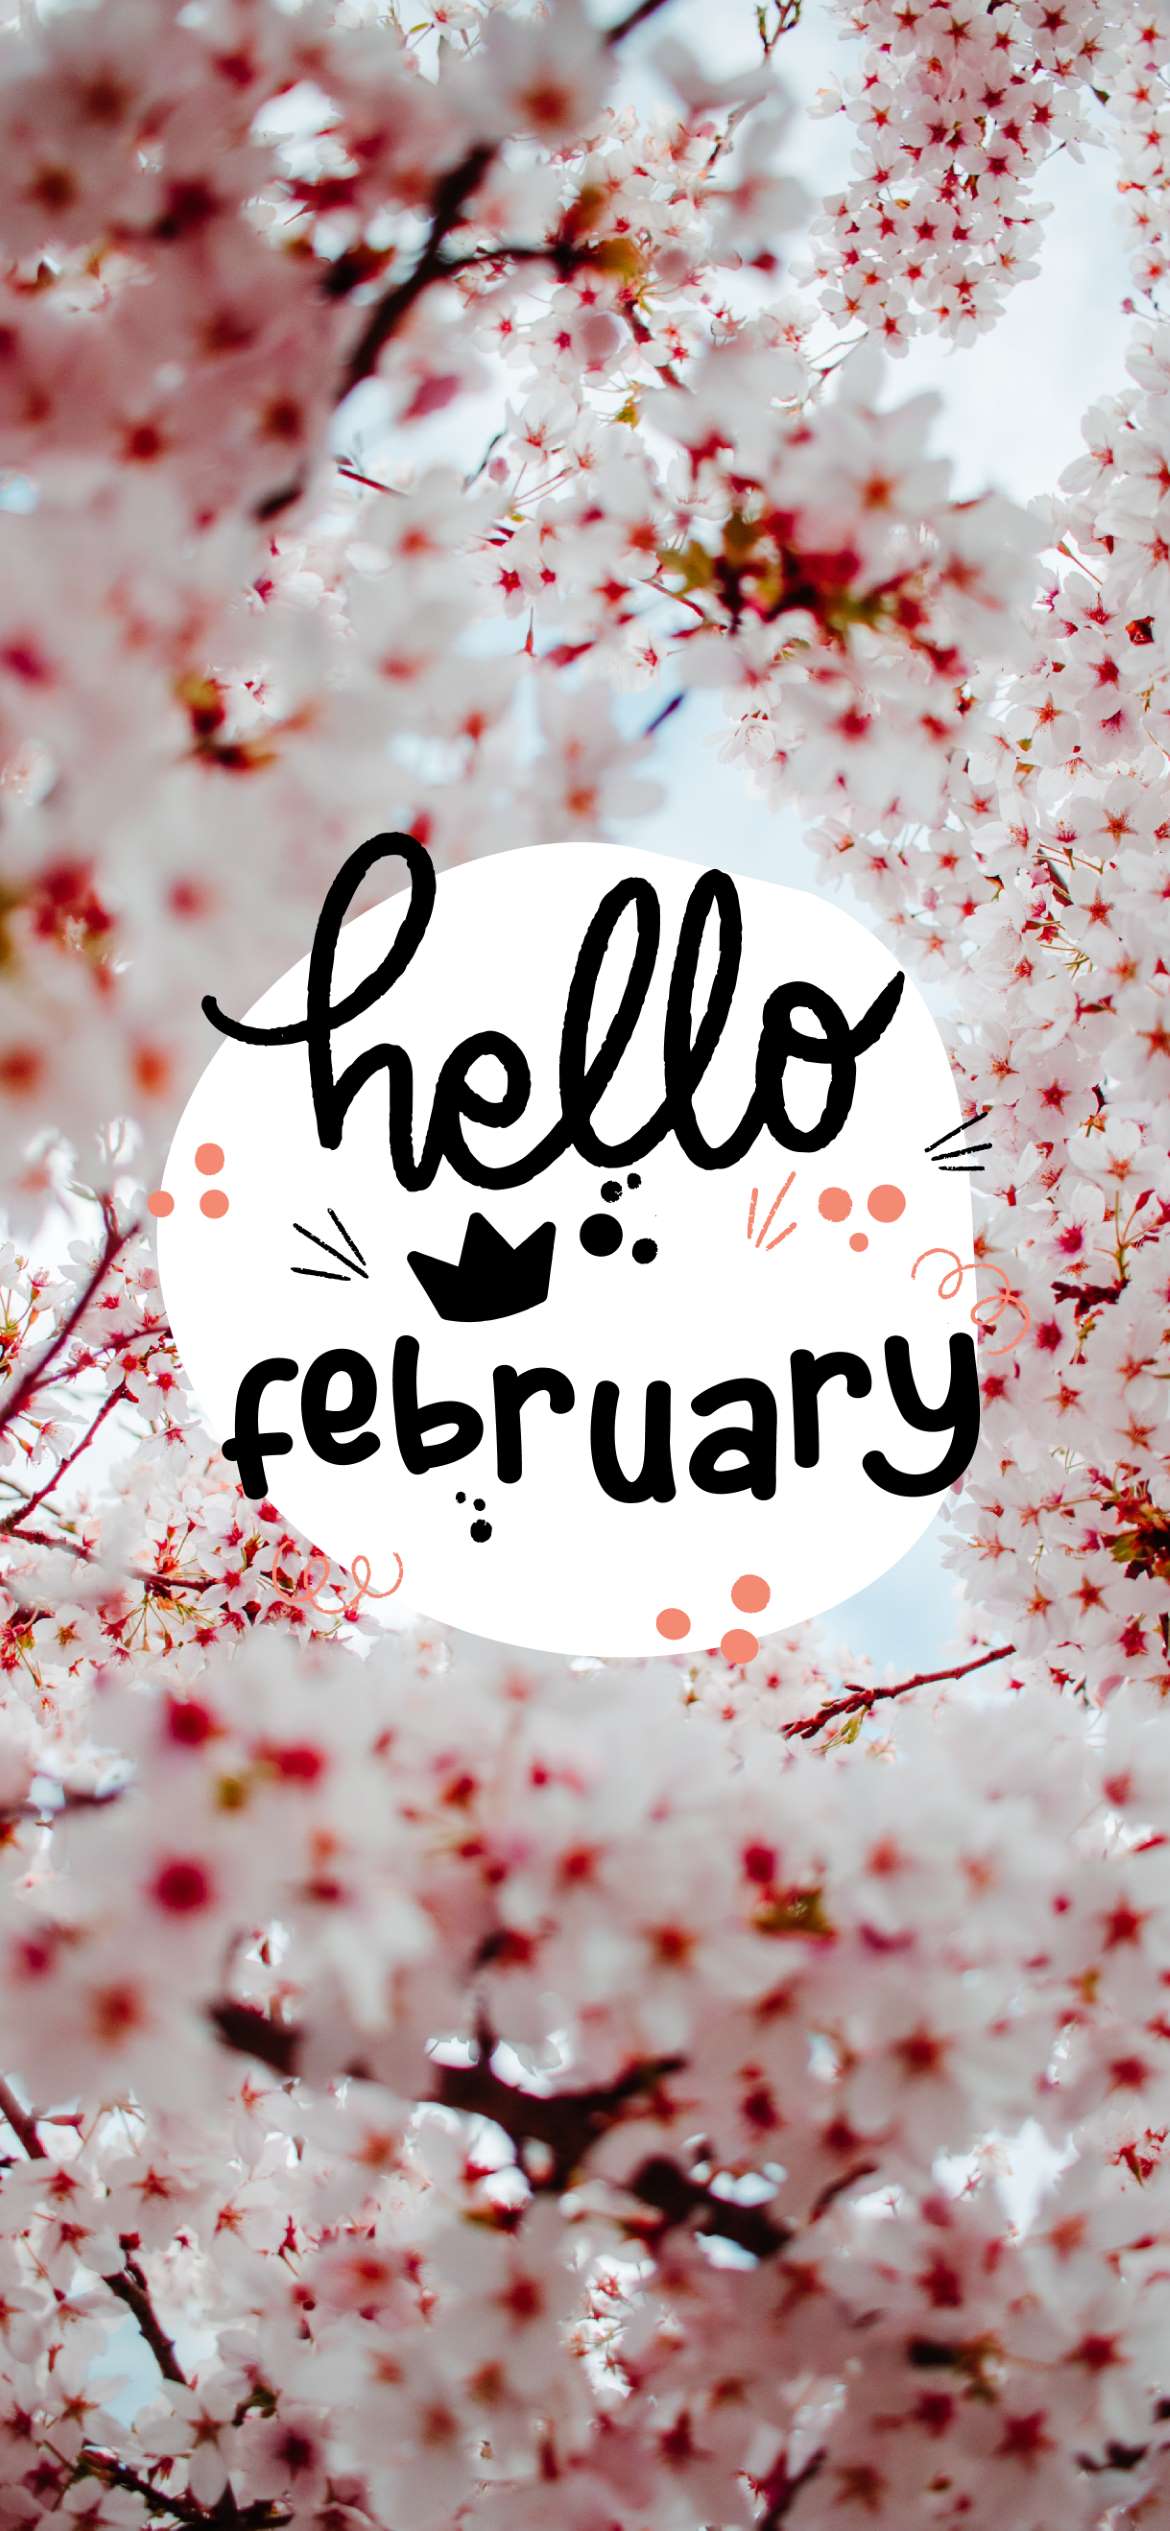 hello february images